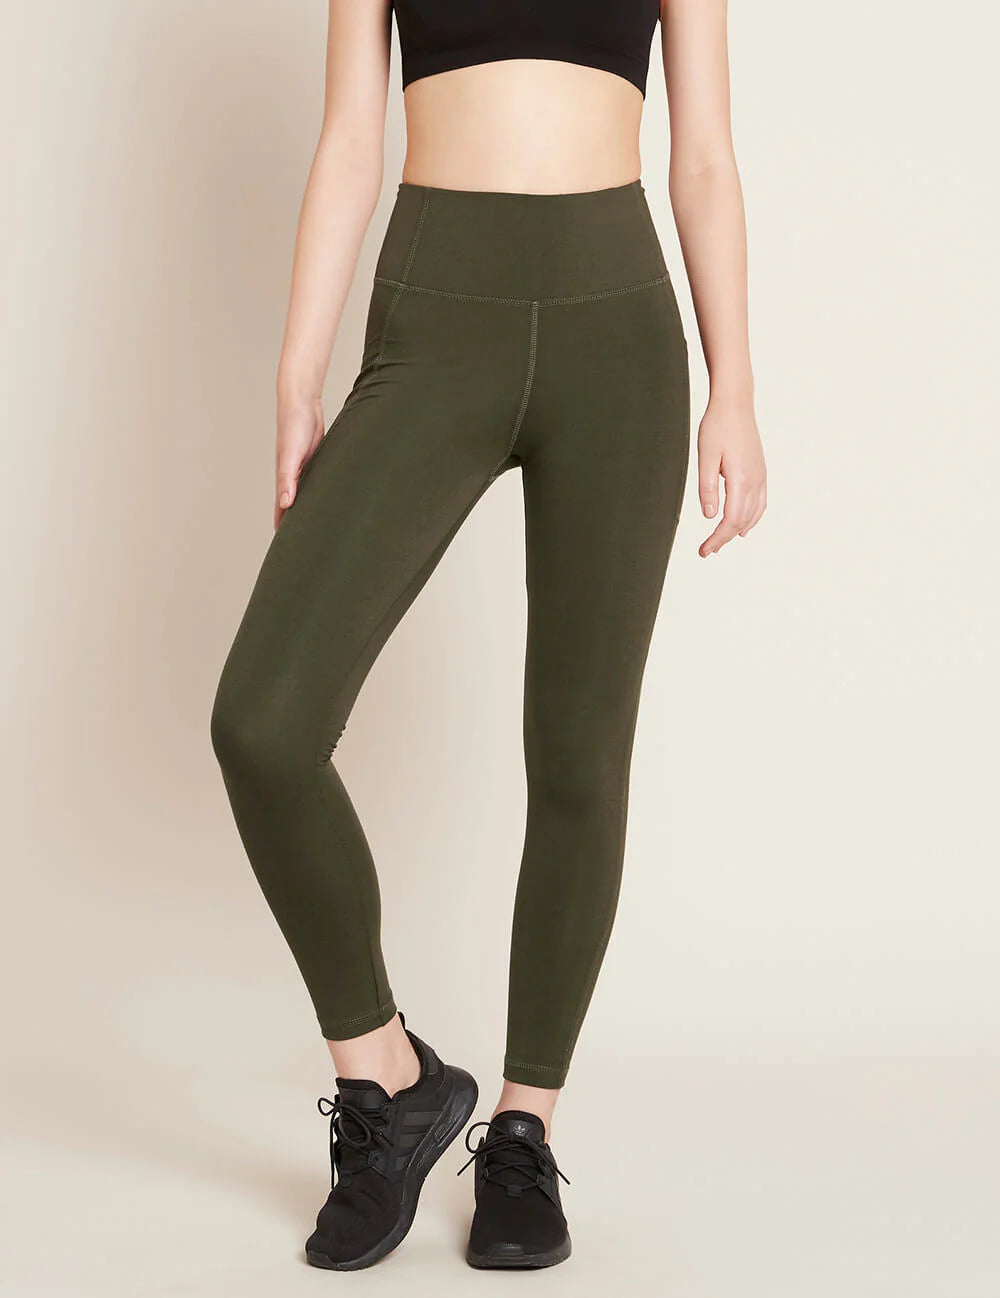 Motivate Full Length High Waist Tights with Pockets